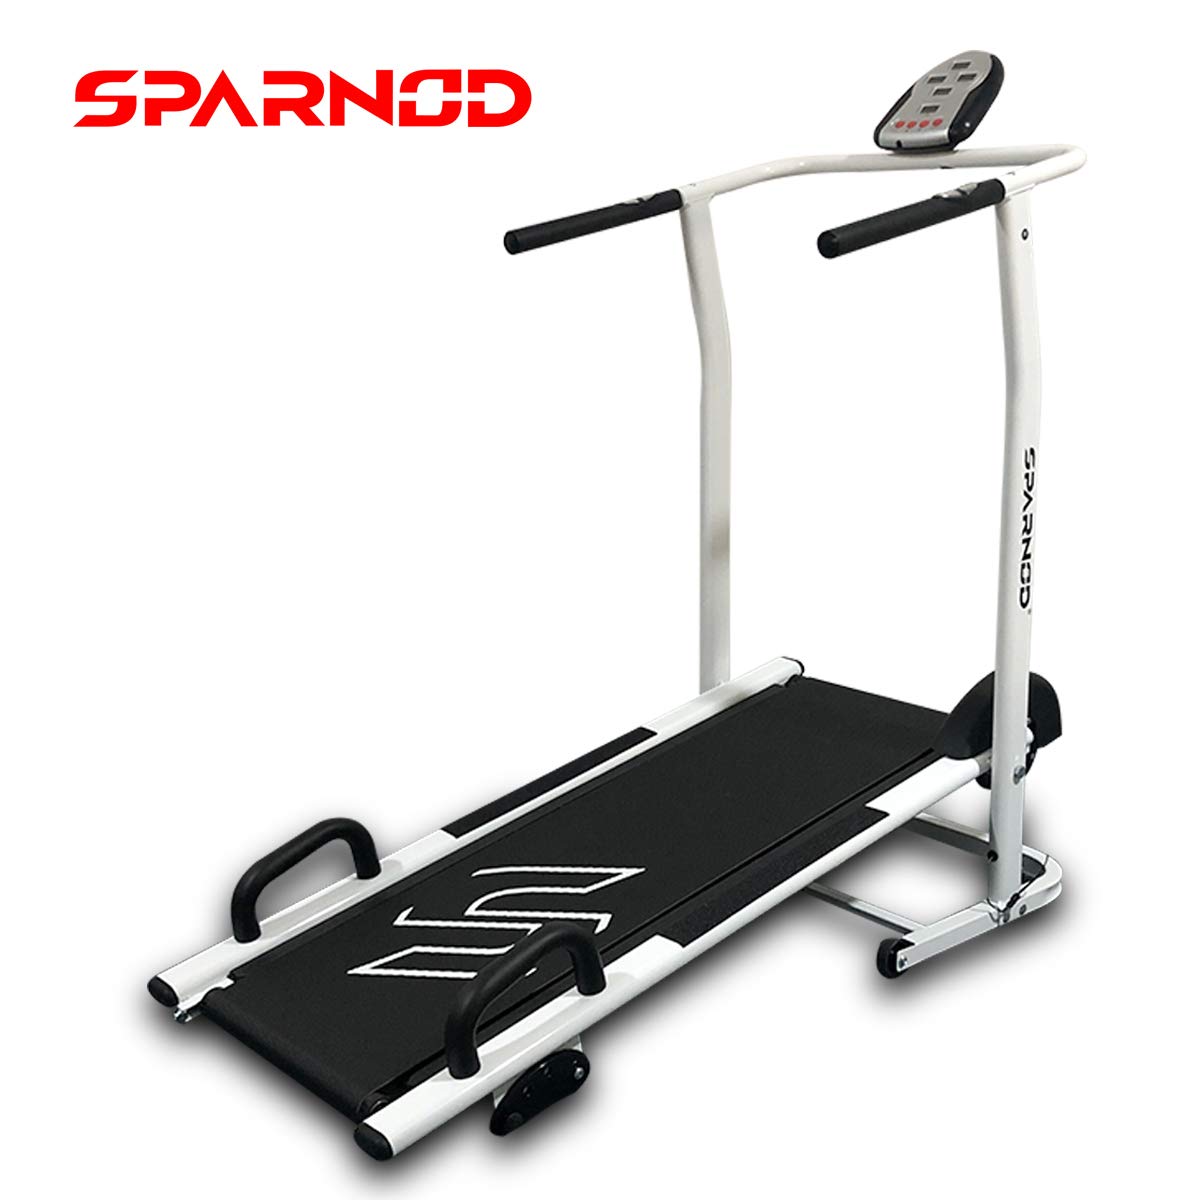 Sparnod Fitness STH-500 Manual Treadmill is one of the best and latest manual treadmills in India